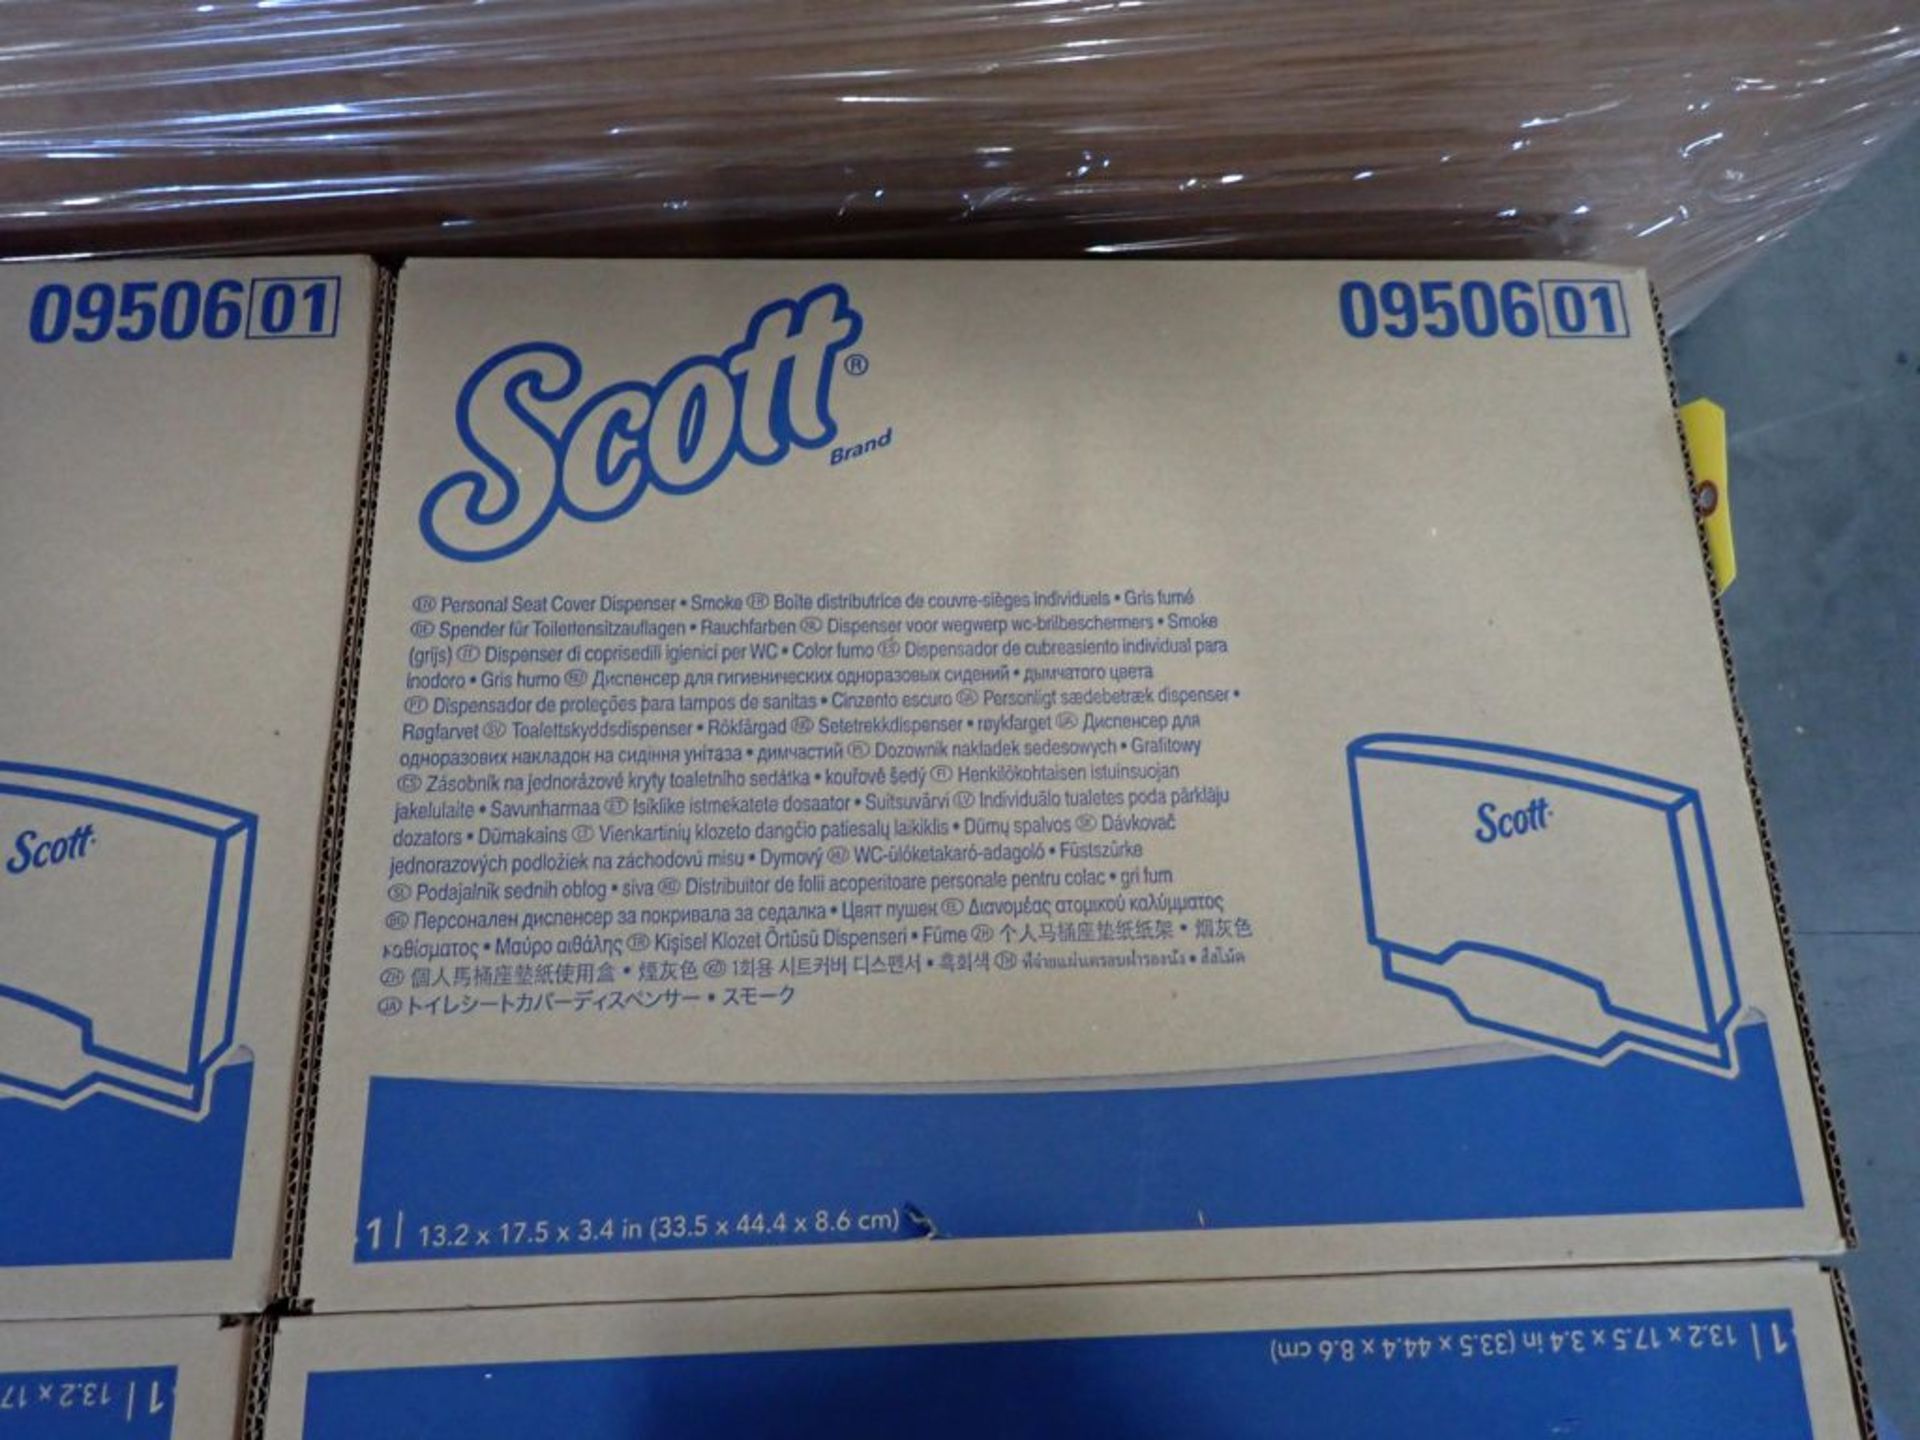 Lot of (24) Cases of Scott Seat Covers - Image 3 of 5